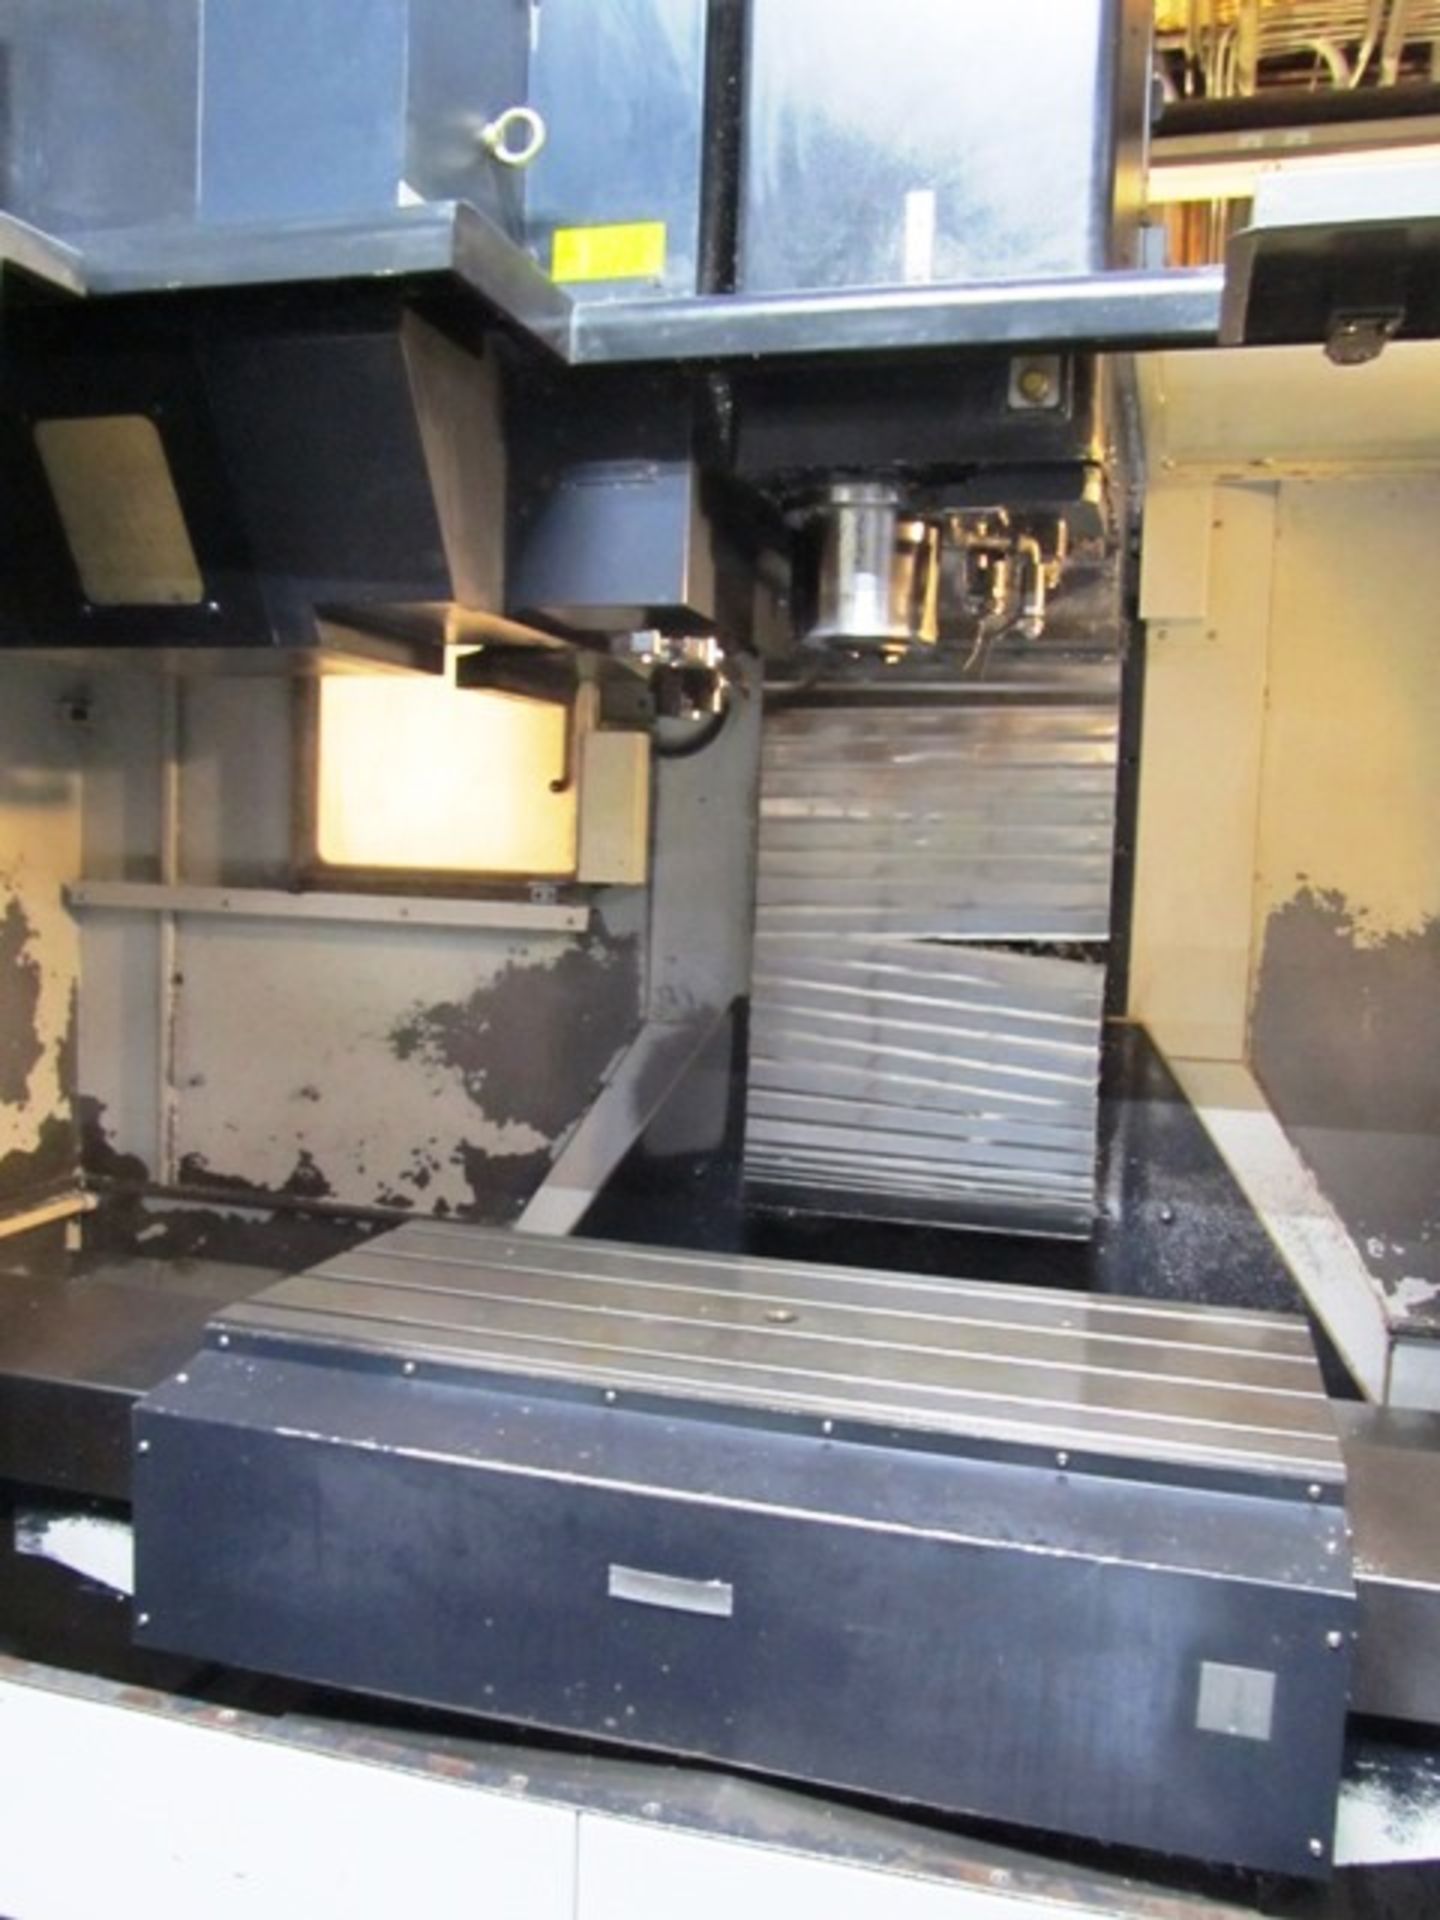 Doosan MV 4020L CNC Vertical Machining Center with 48'' x 20'' Worktable, #40 Taper Spindle Speeds - Image 5 of 5